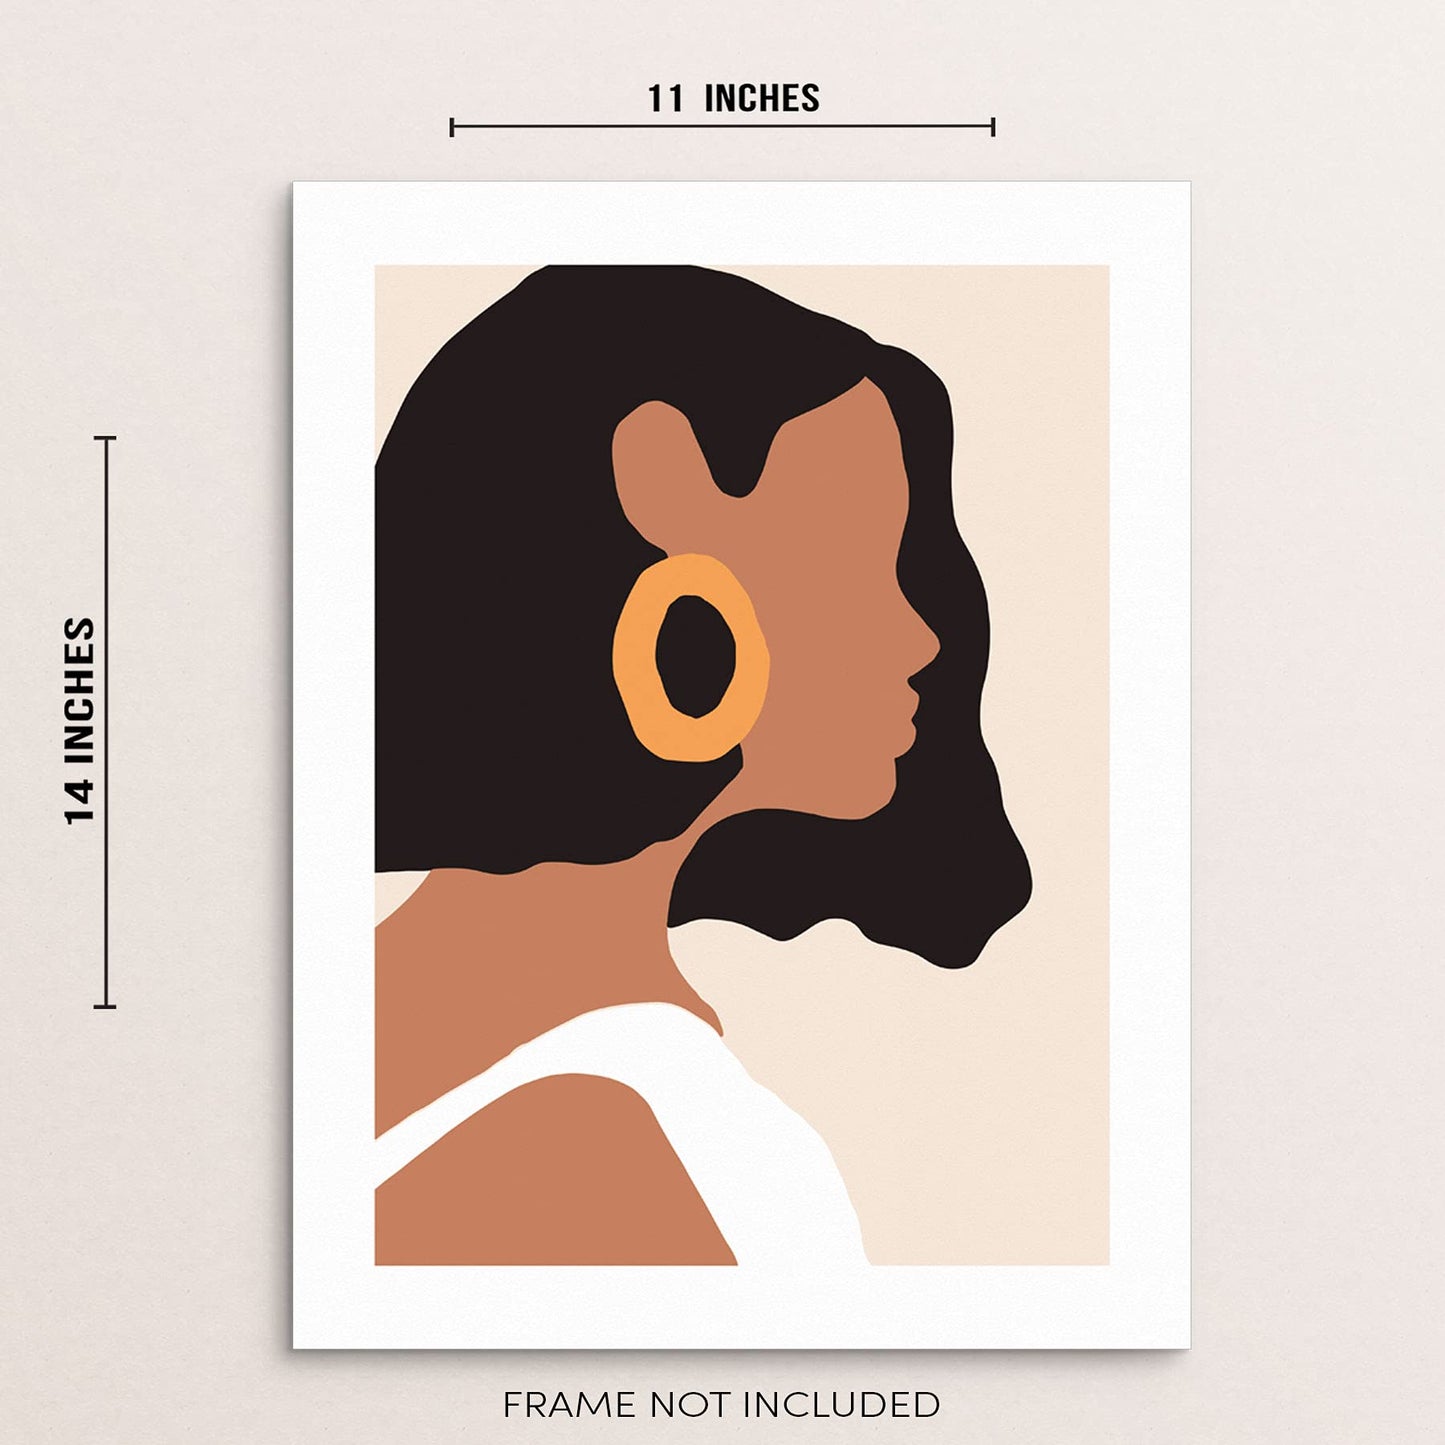 Sincerely, Not Abstract Wall Art Print Woman's Face with Earring Gouache Fashion Poster 11"x14" UNFRAMED Modern Minimalist Artwork for Bedroom Living Room Bathroom Home Office Decor (OPTION 1)